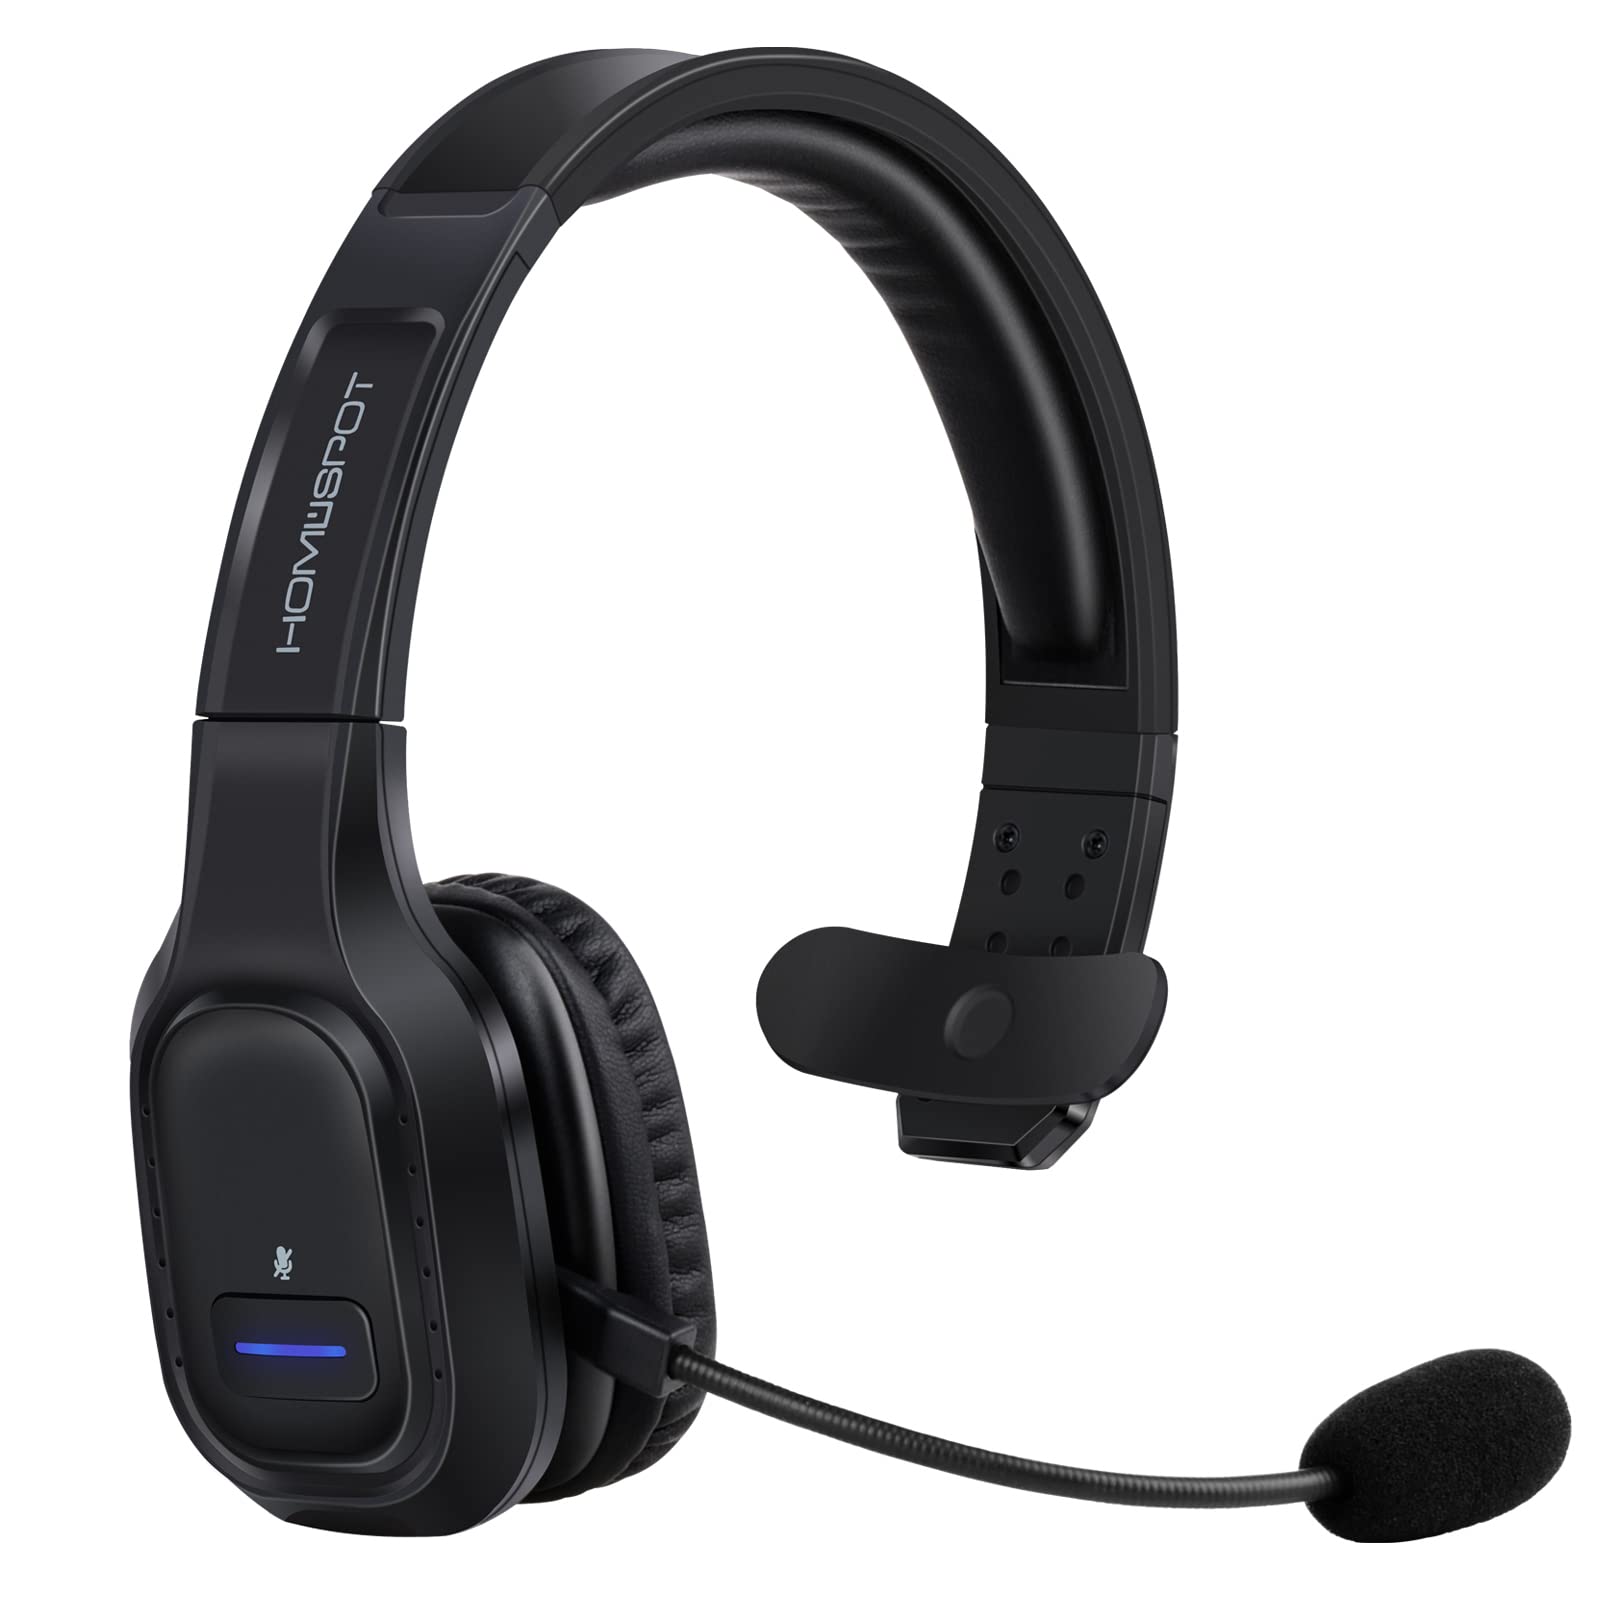 homespot jm100 trucker bluetooth headset with ai noise canceling, wireless headset with rotatable microphone and big mute but